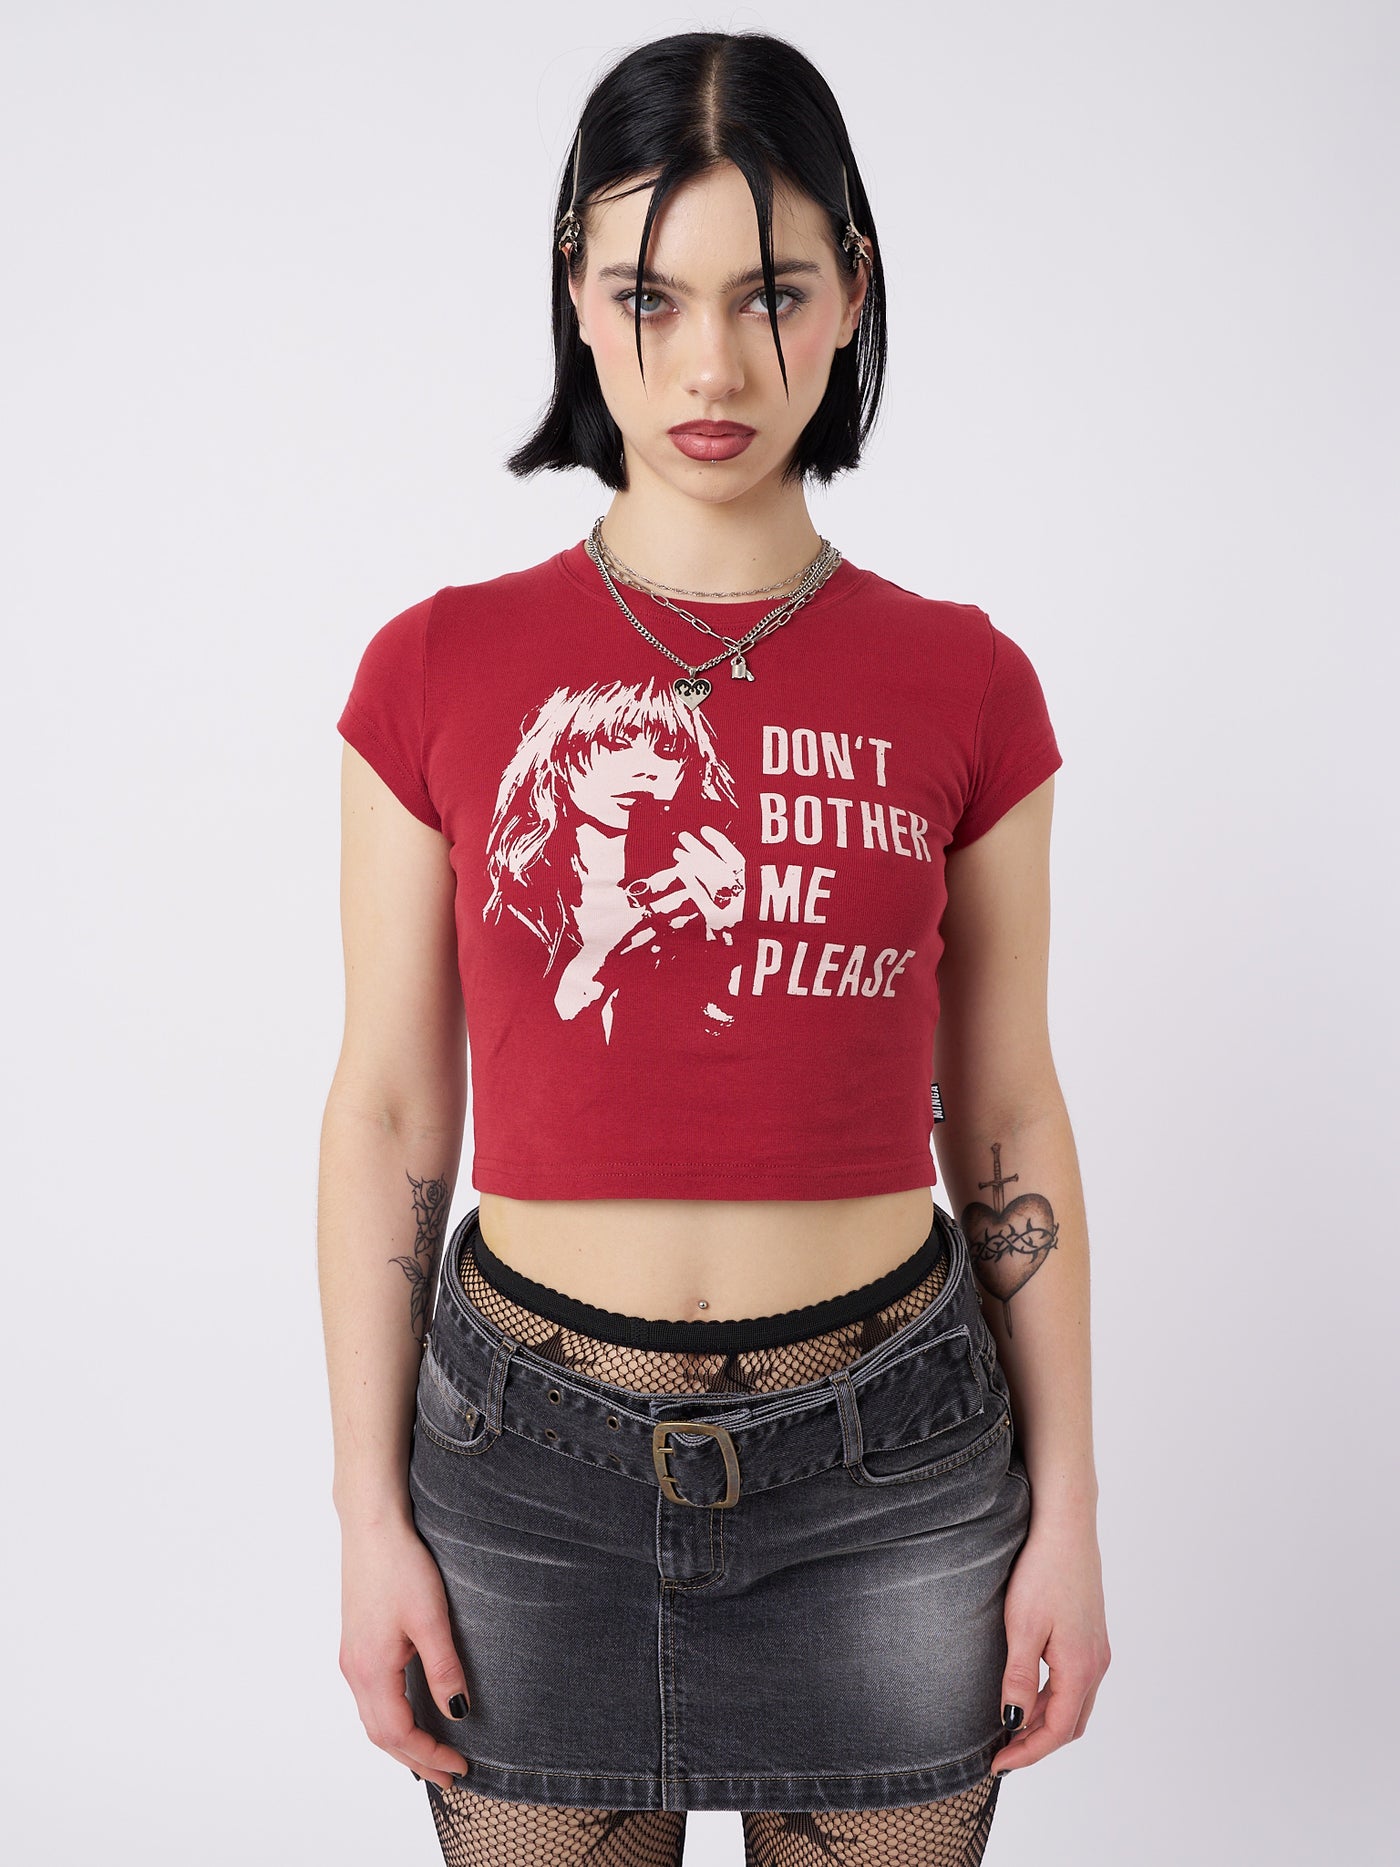 Don't Bother Me Plz Red Baby Tee - Minga London